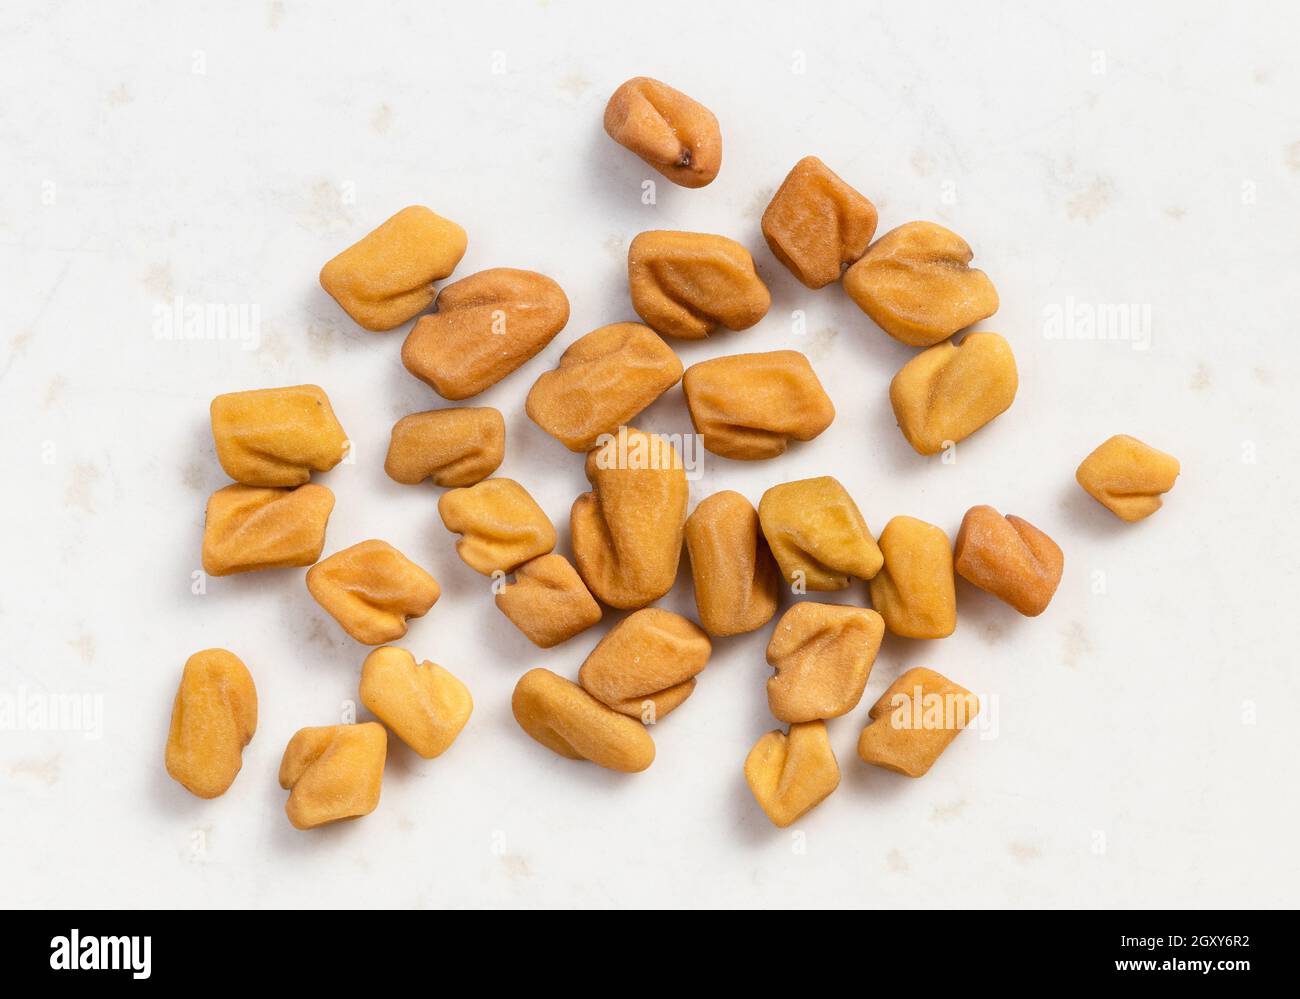 several whole fenugreek seeds close up on gray ceramic plate Stock Photo